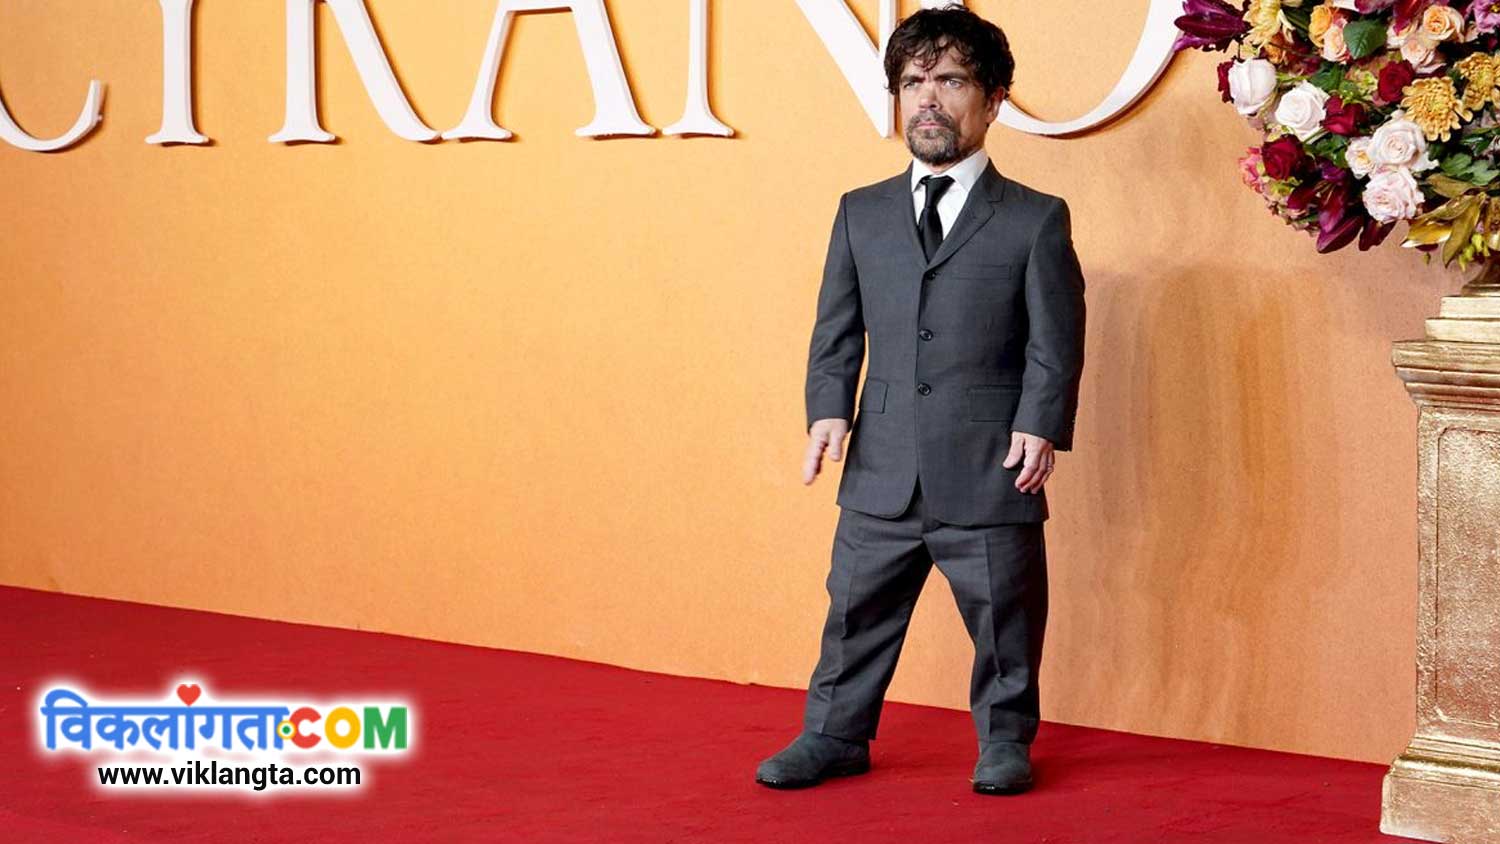 famous disabled person in the world Peter Dinklage